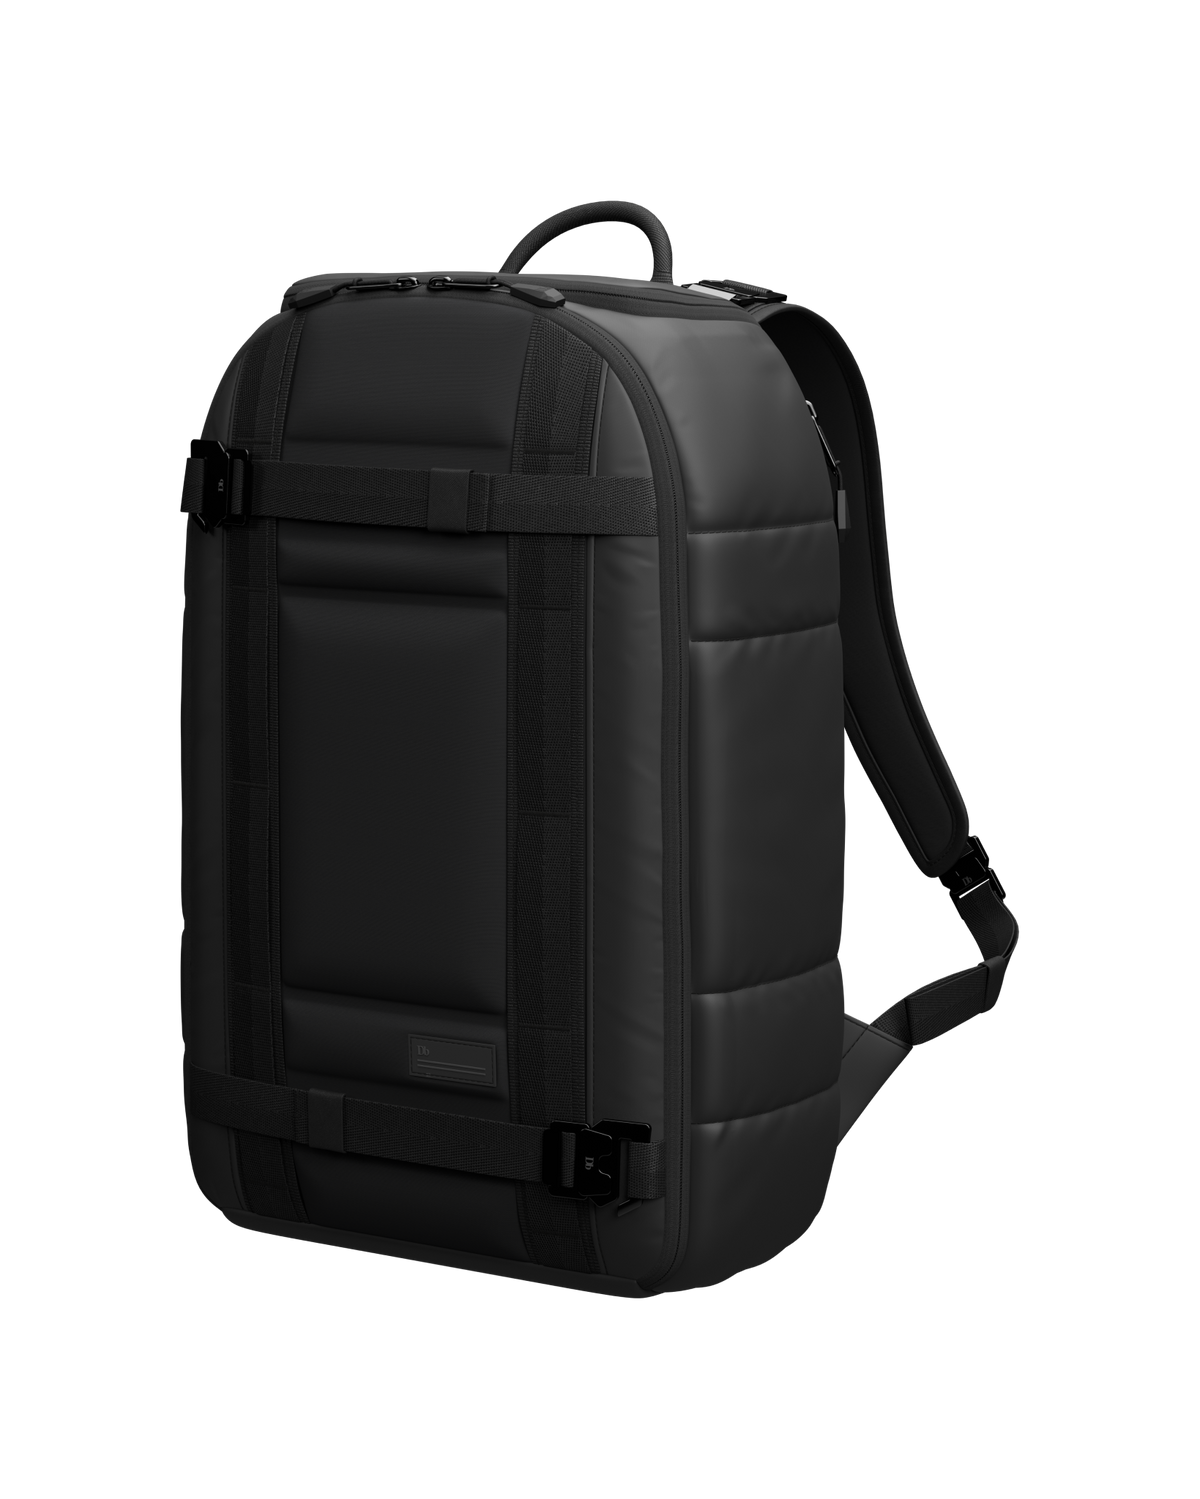 TheRamverk21LBackpack-245E01_ac2f6cf1-0a8d-4c18-a687-8be6c7b00ecb.png